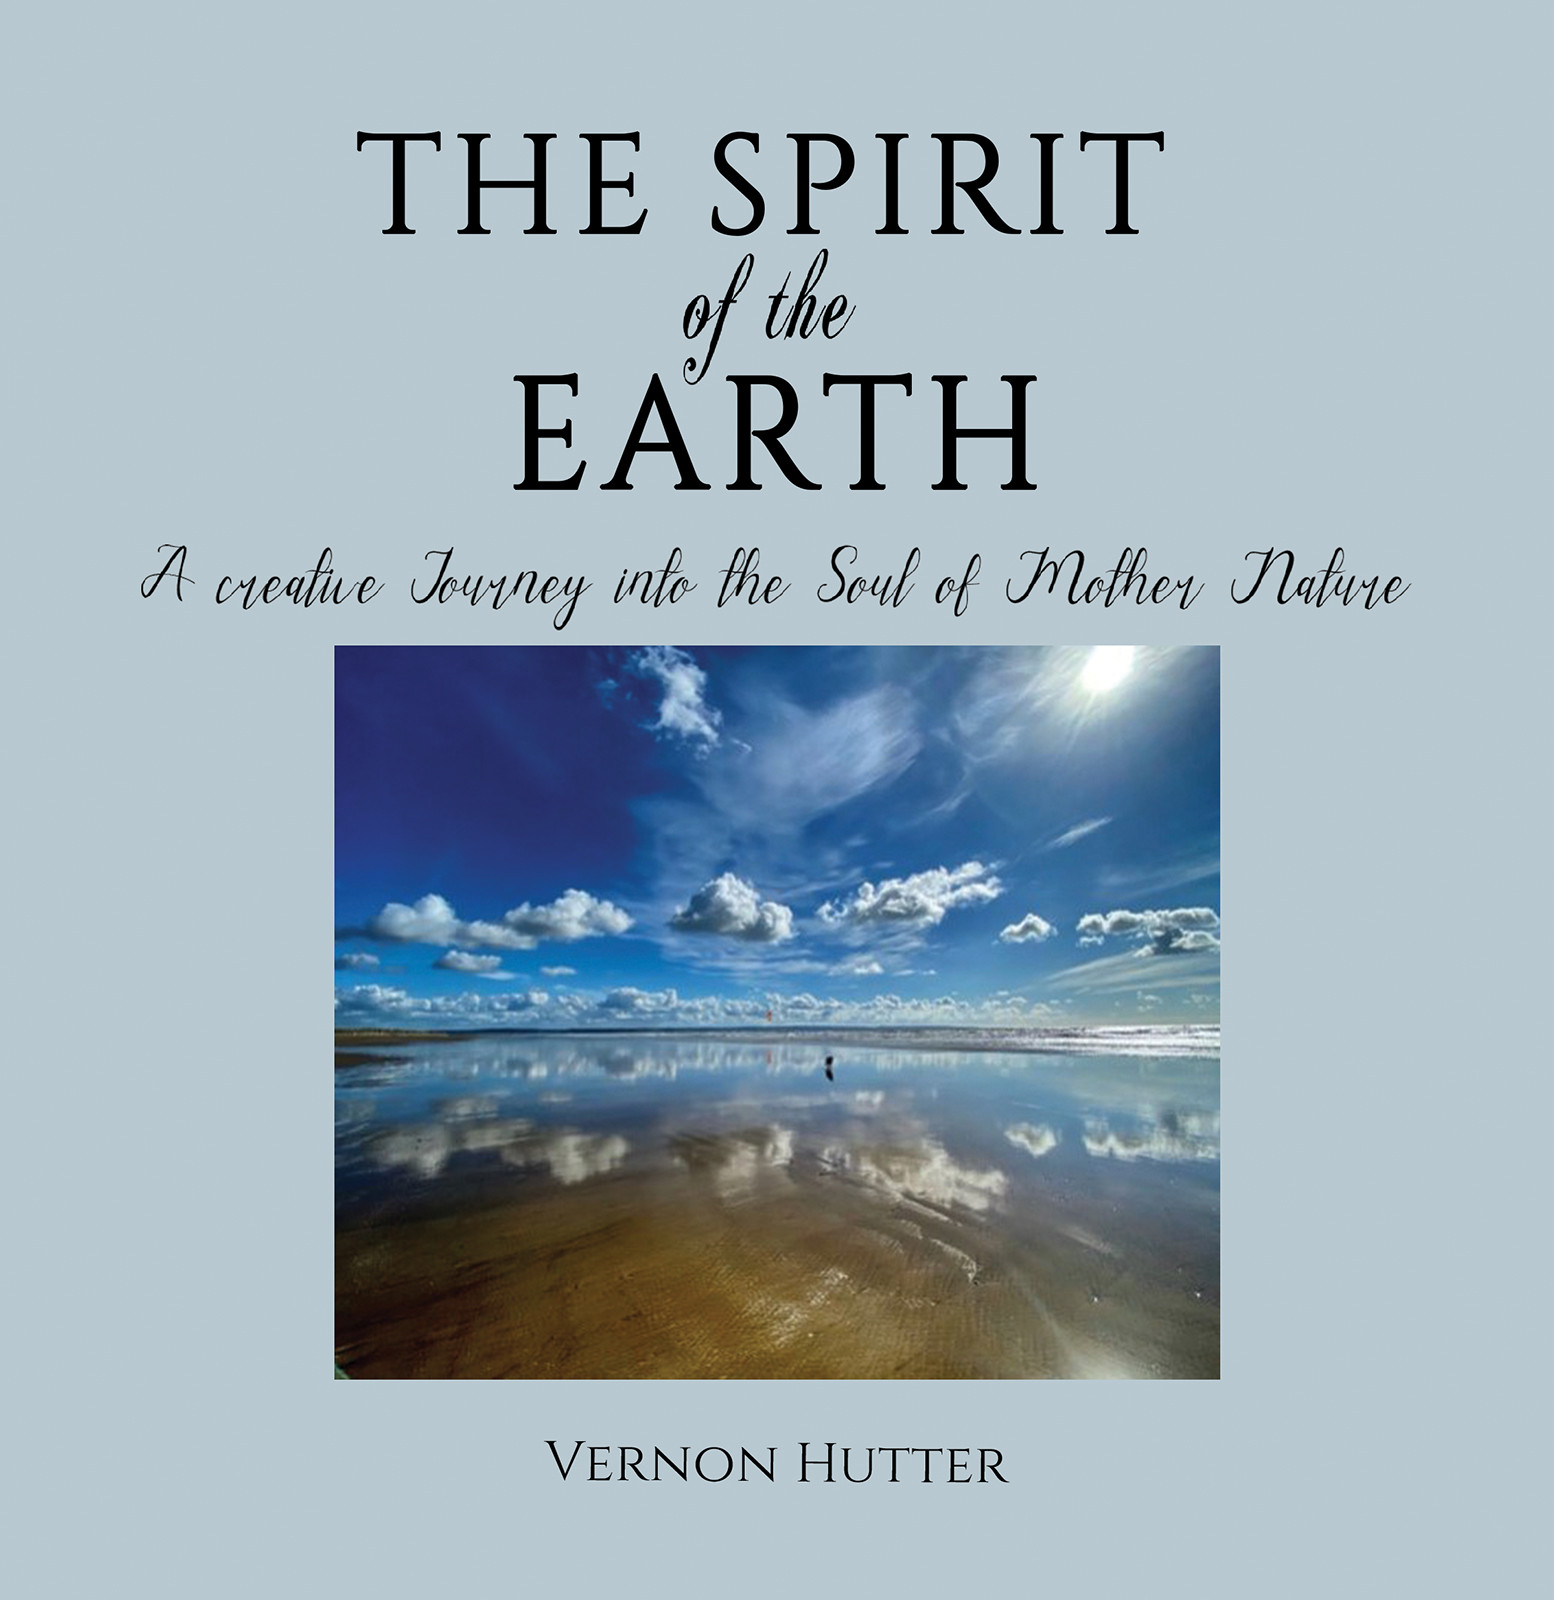 The Spirit of the Earth